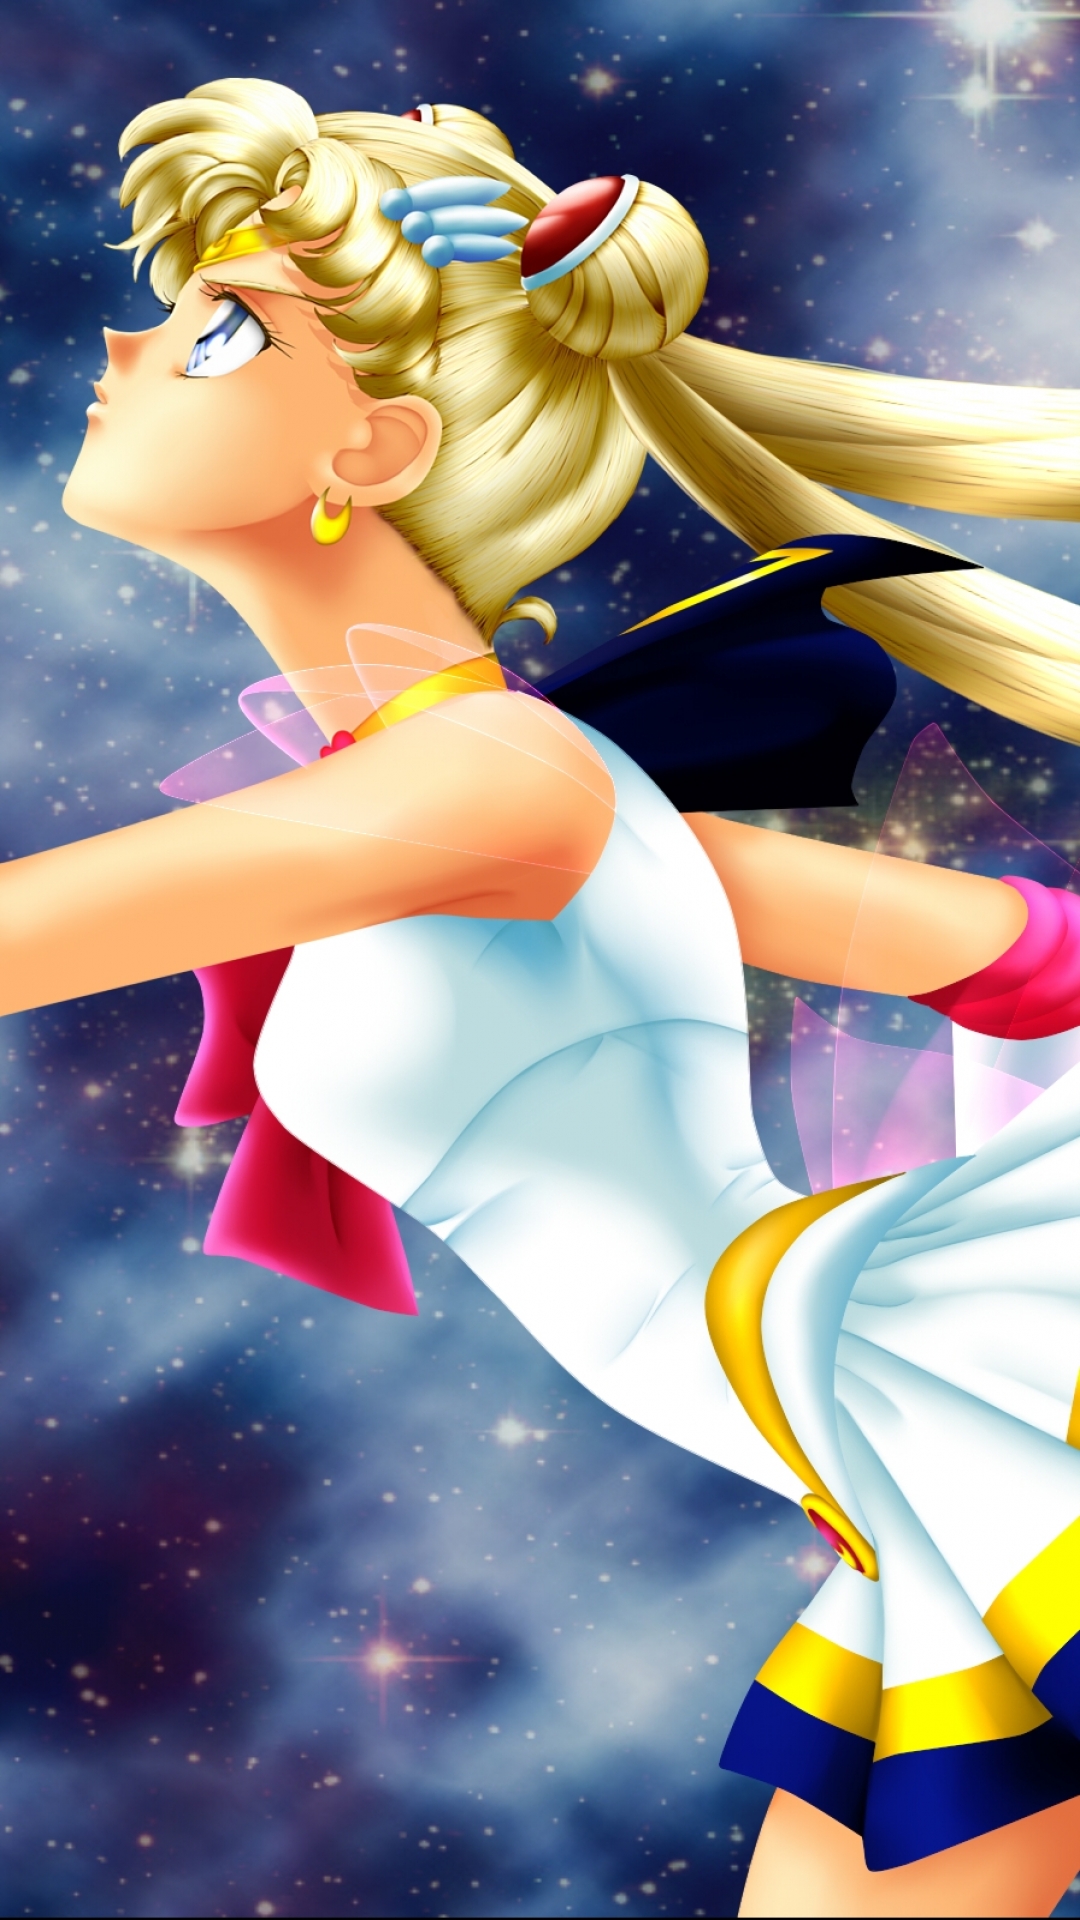 Miranda on X Changed my phones background to this Sailor Moon cap   httpstcoJs4mdyP0Wd  X